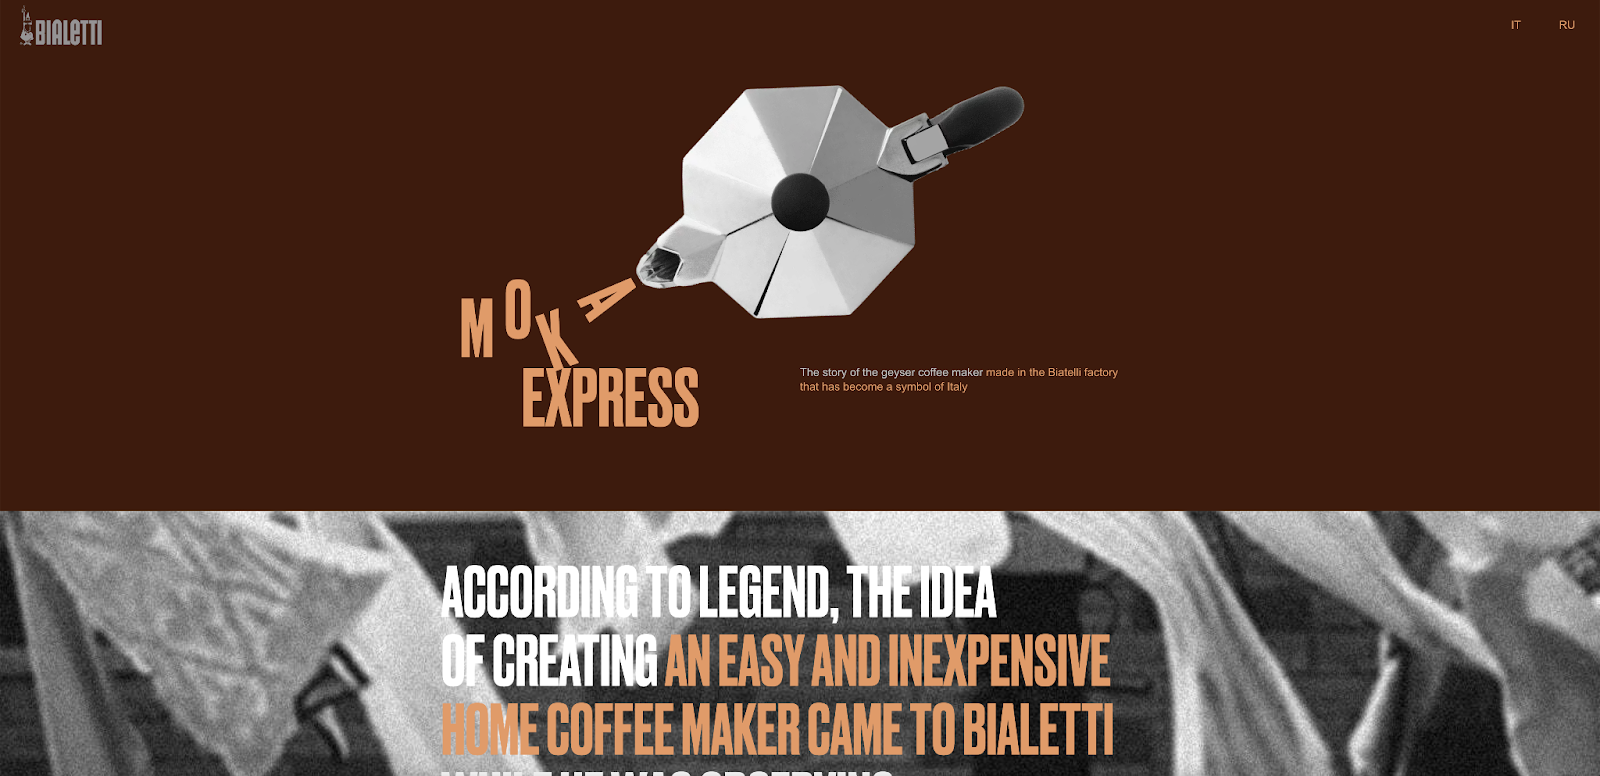 The Bialetti website features retro illustrations, a classic color scheme, and a simple, elegant layout for your inspiration needs